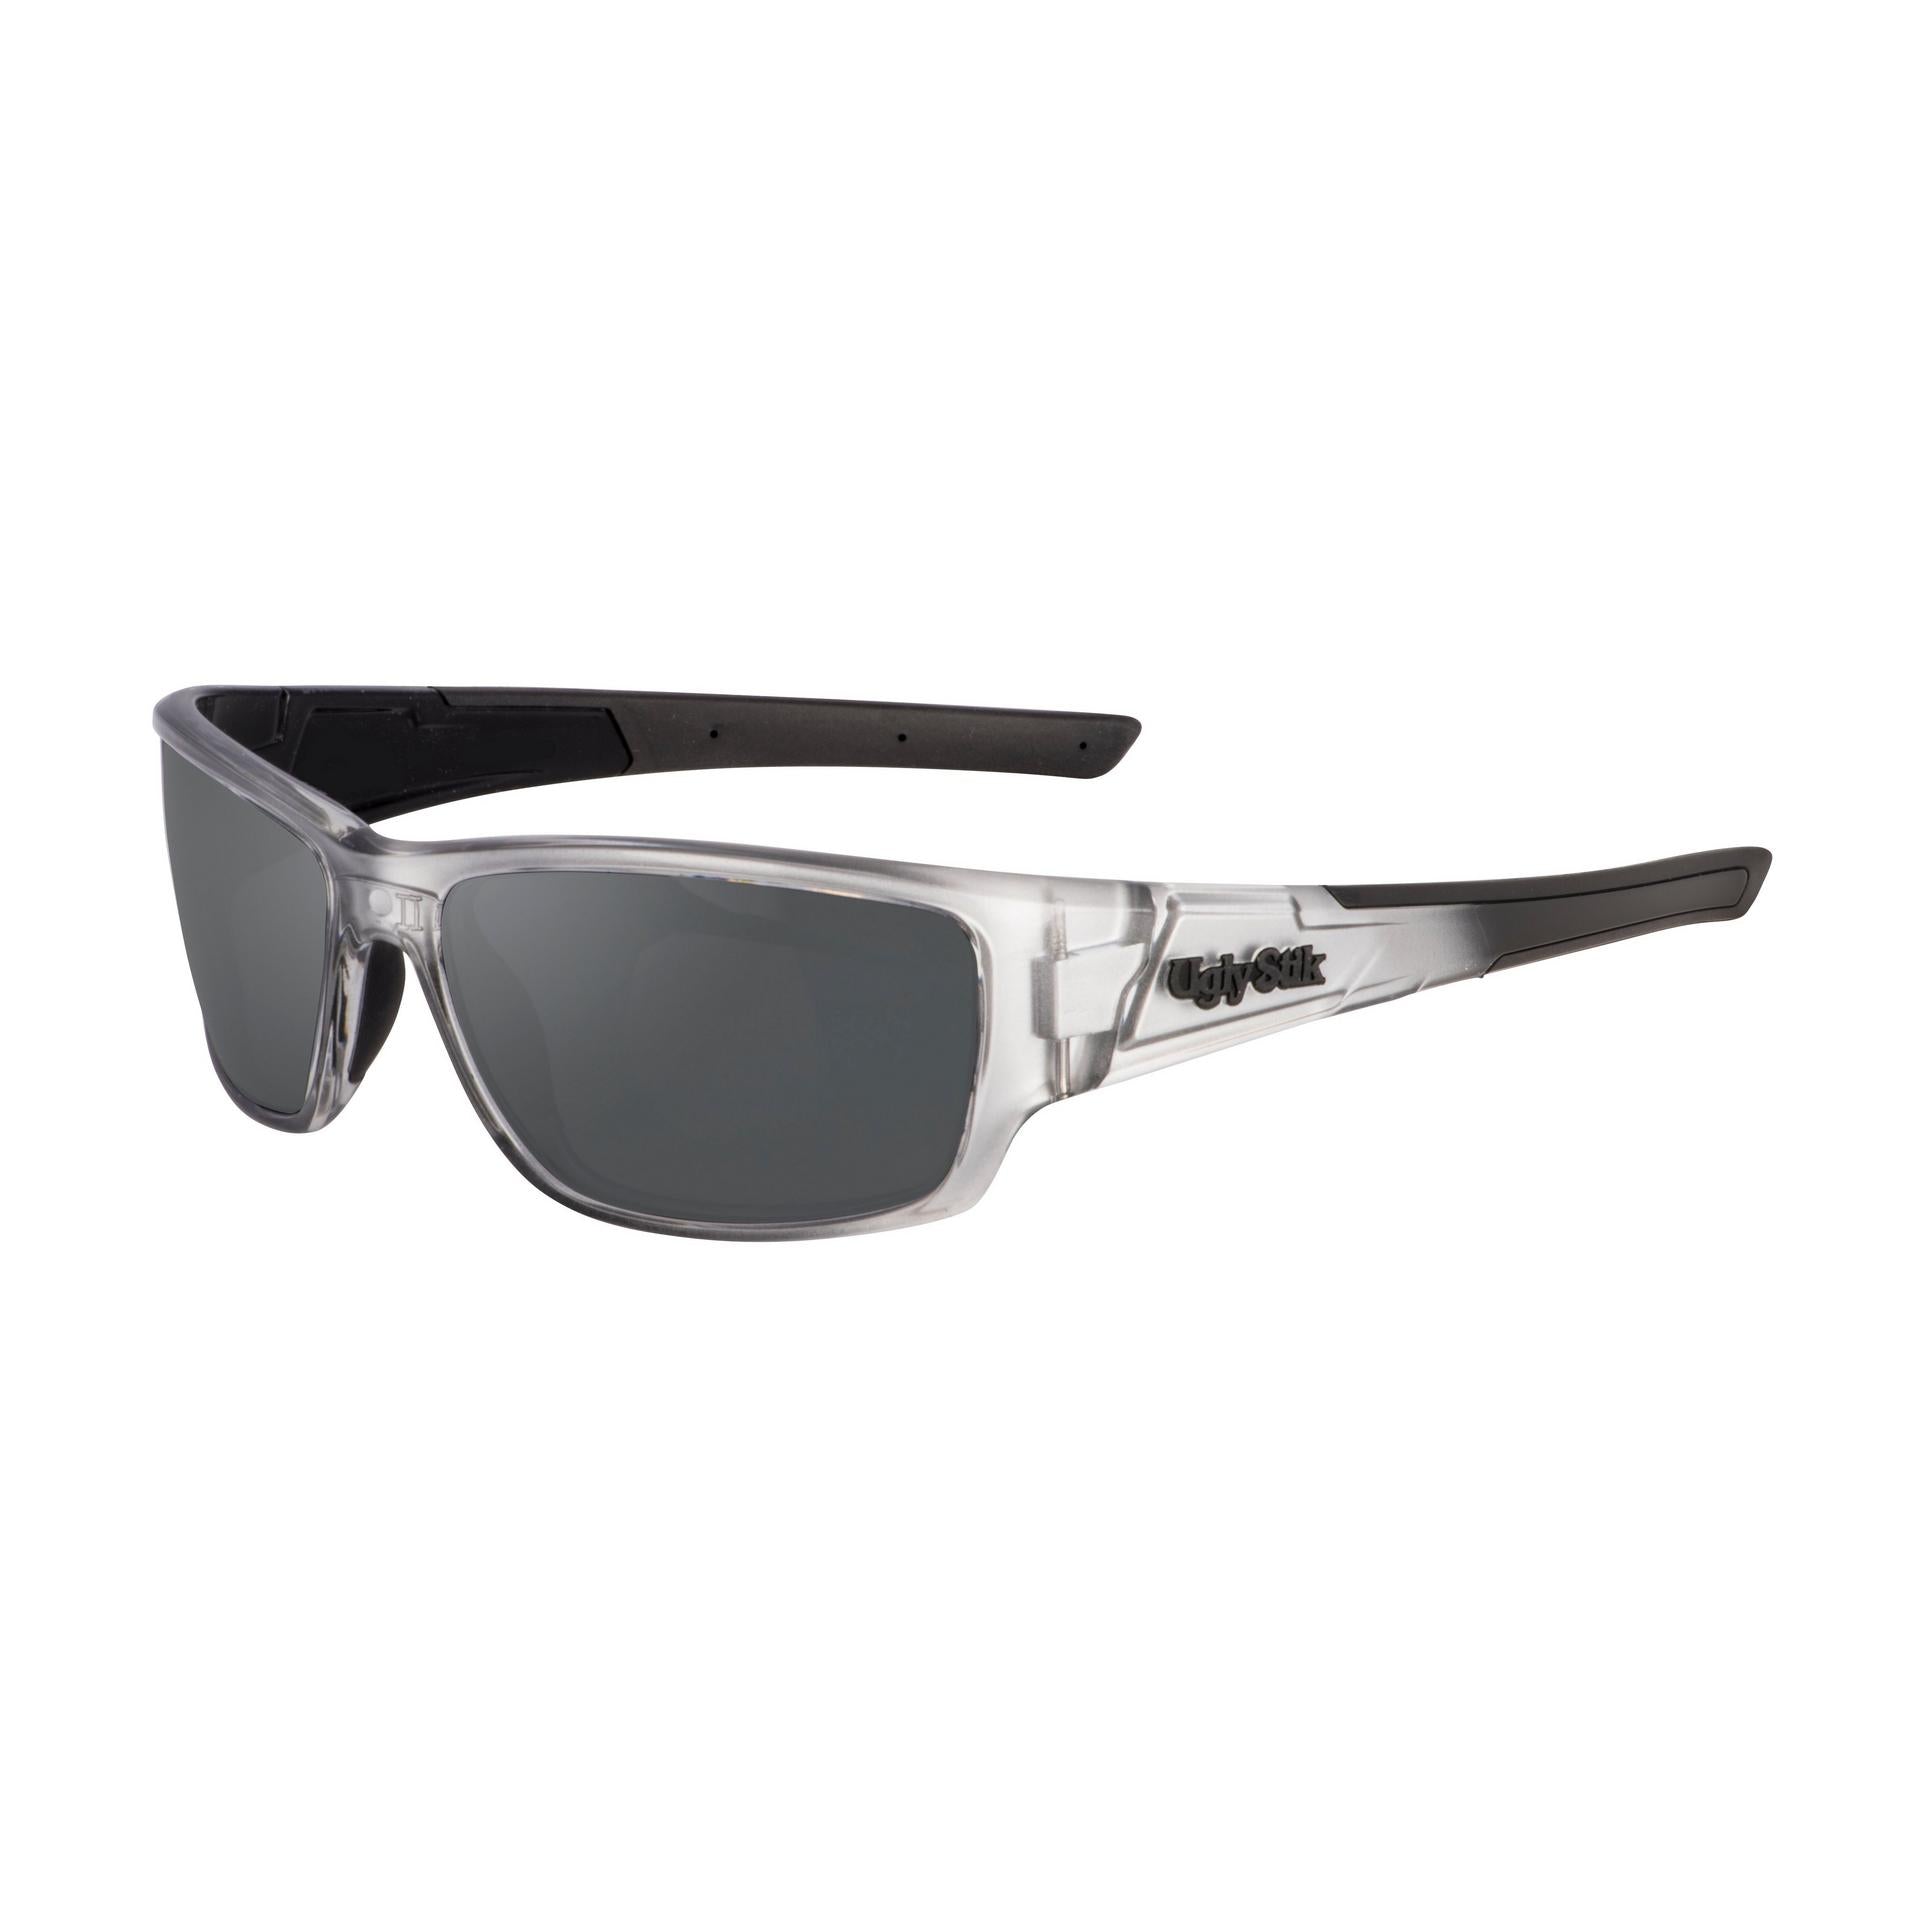 Silver sunglasses with grey lens